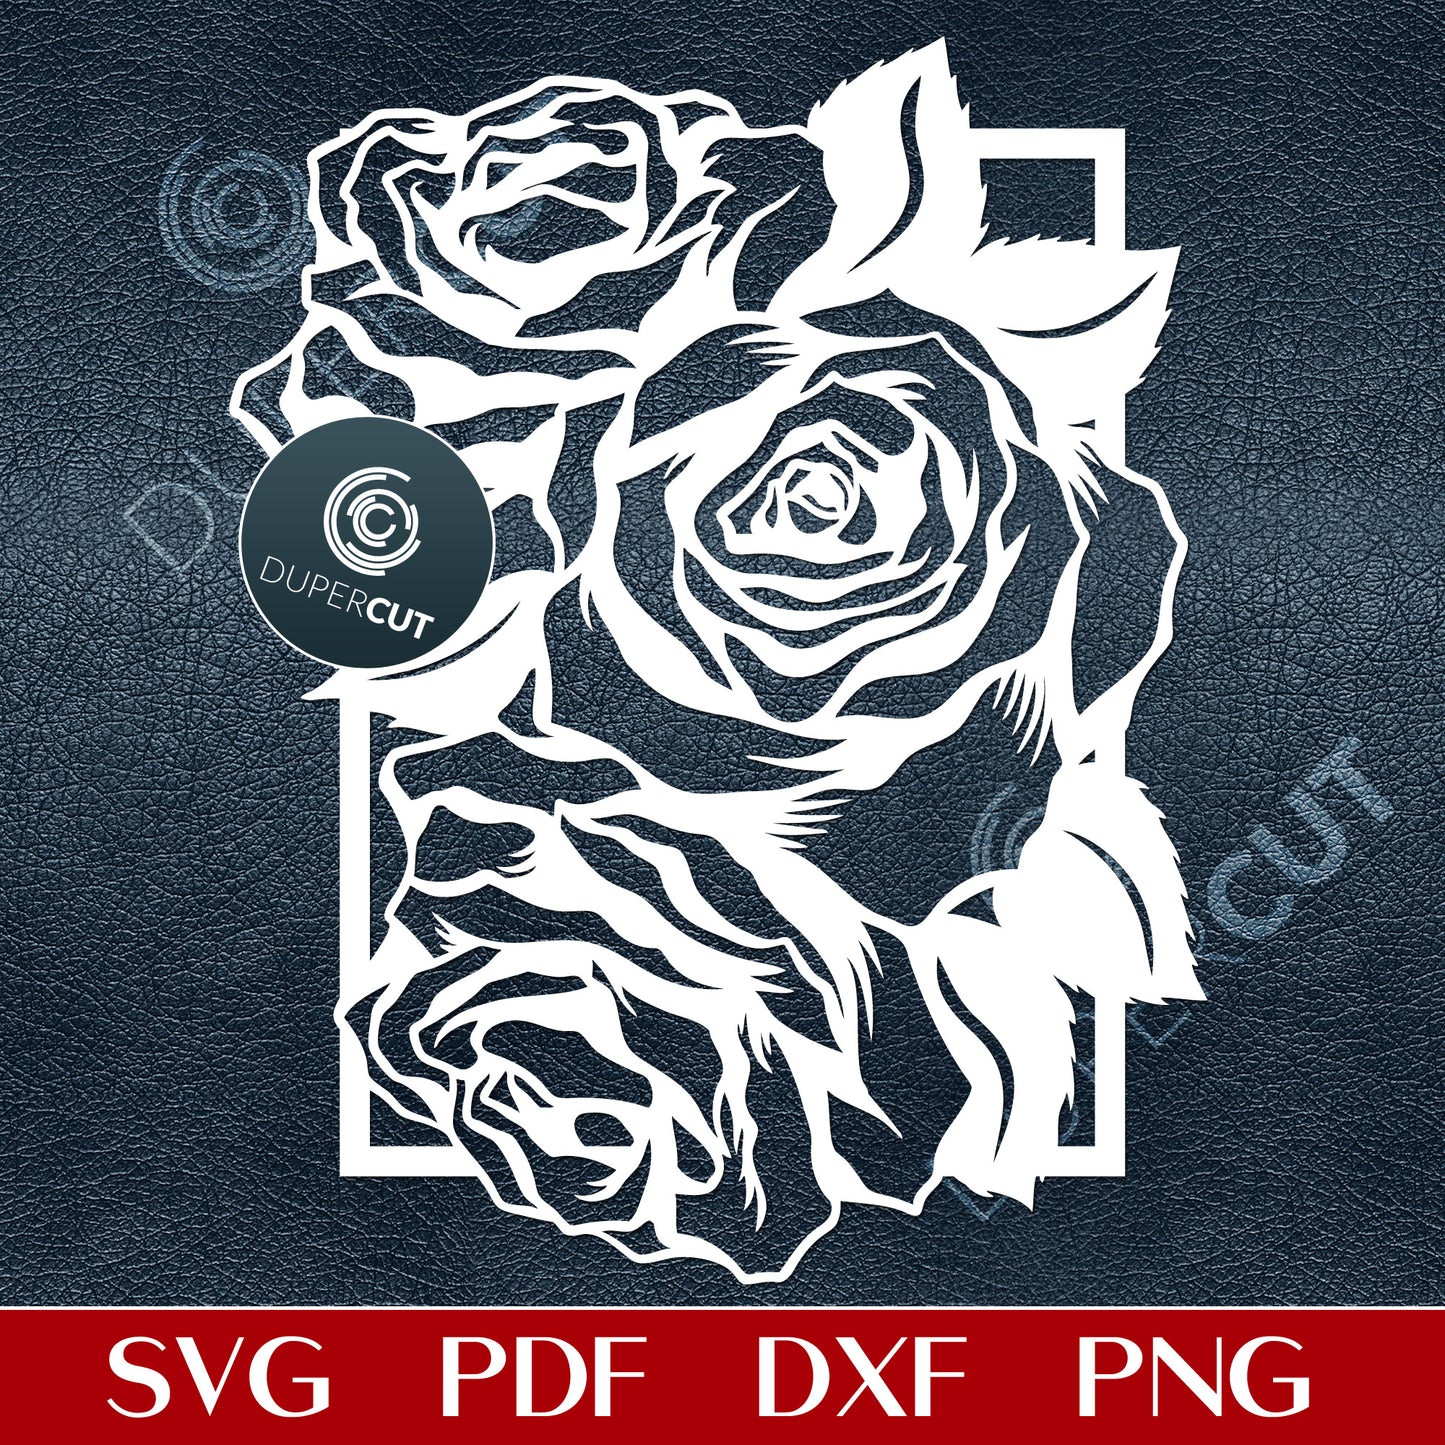 Roses arrangement, paper cutting template. SVG PNG DXF cutting files for Glowforge, Cricut, Silhouette cameo, laser engraving.